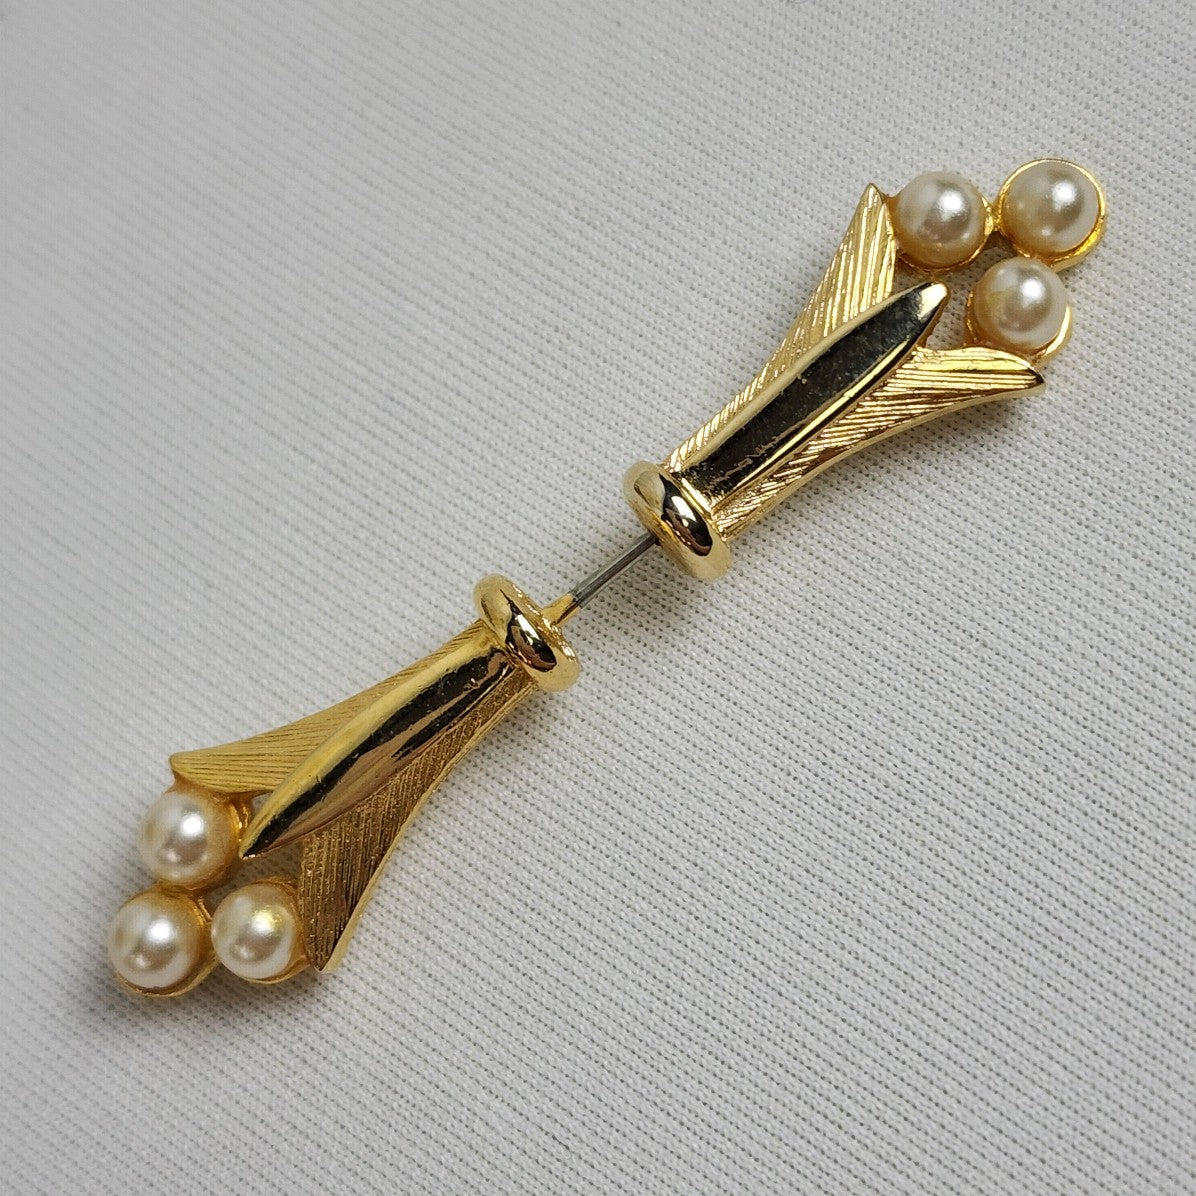 Vintage Faux Pearl Sweater Brooch Gold Tone Etched